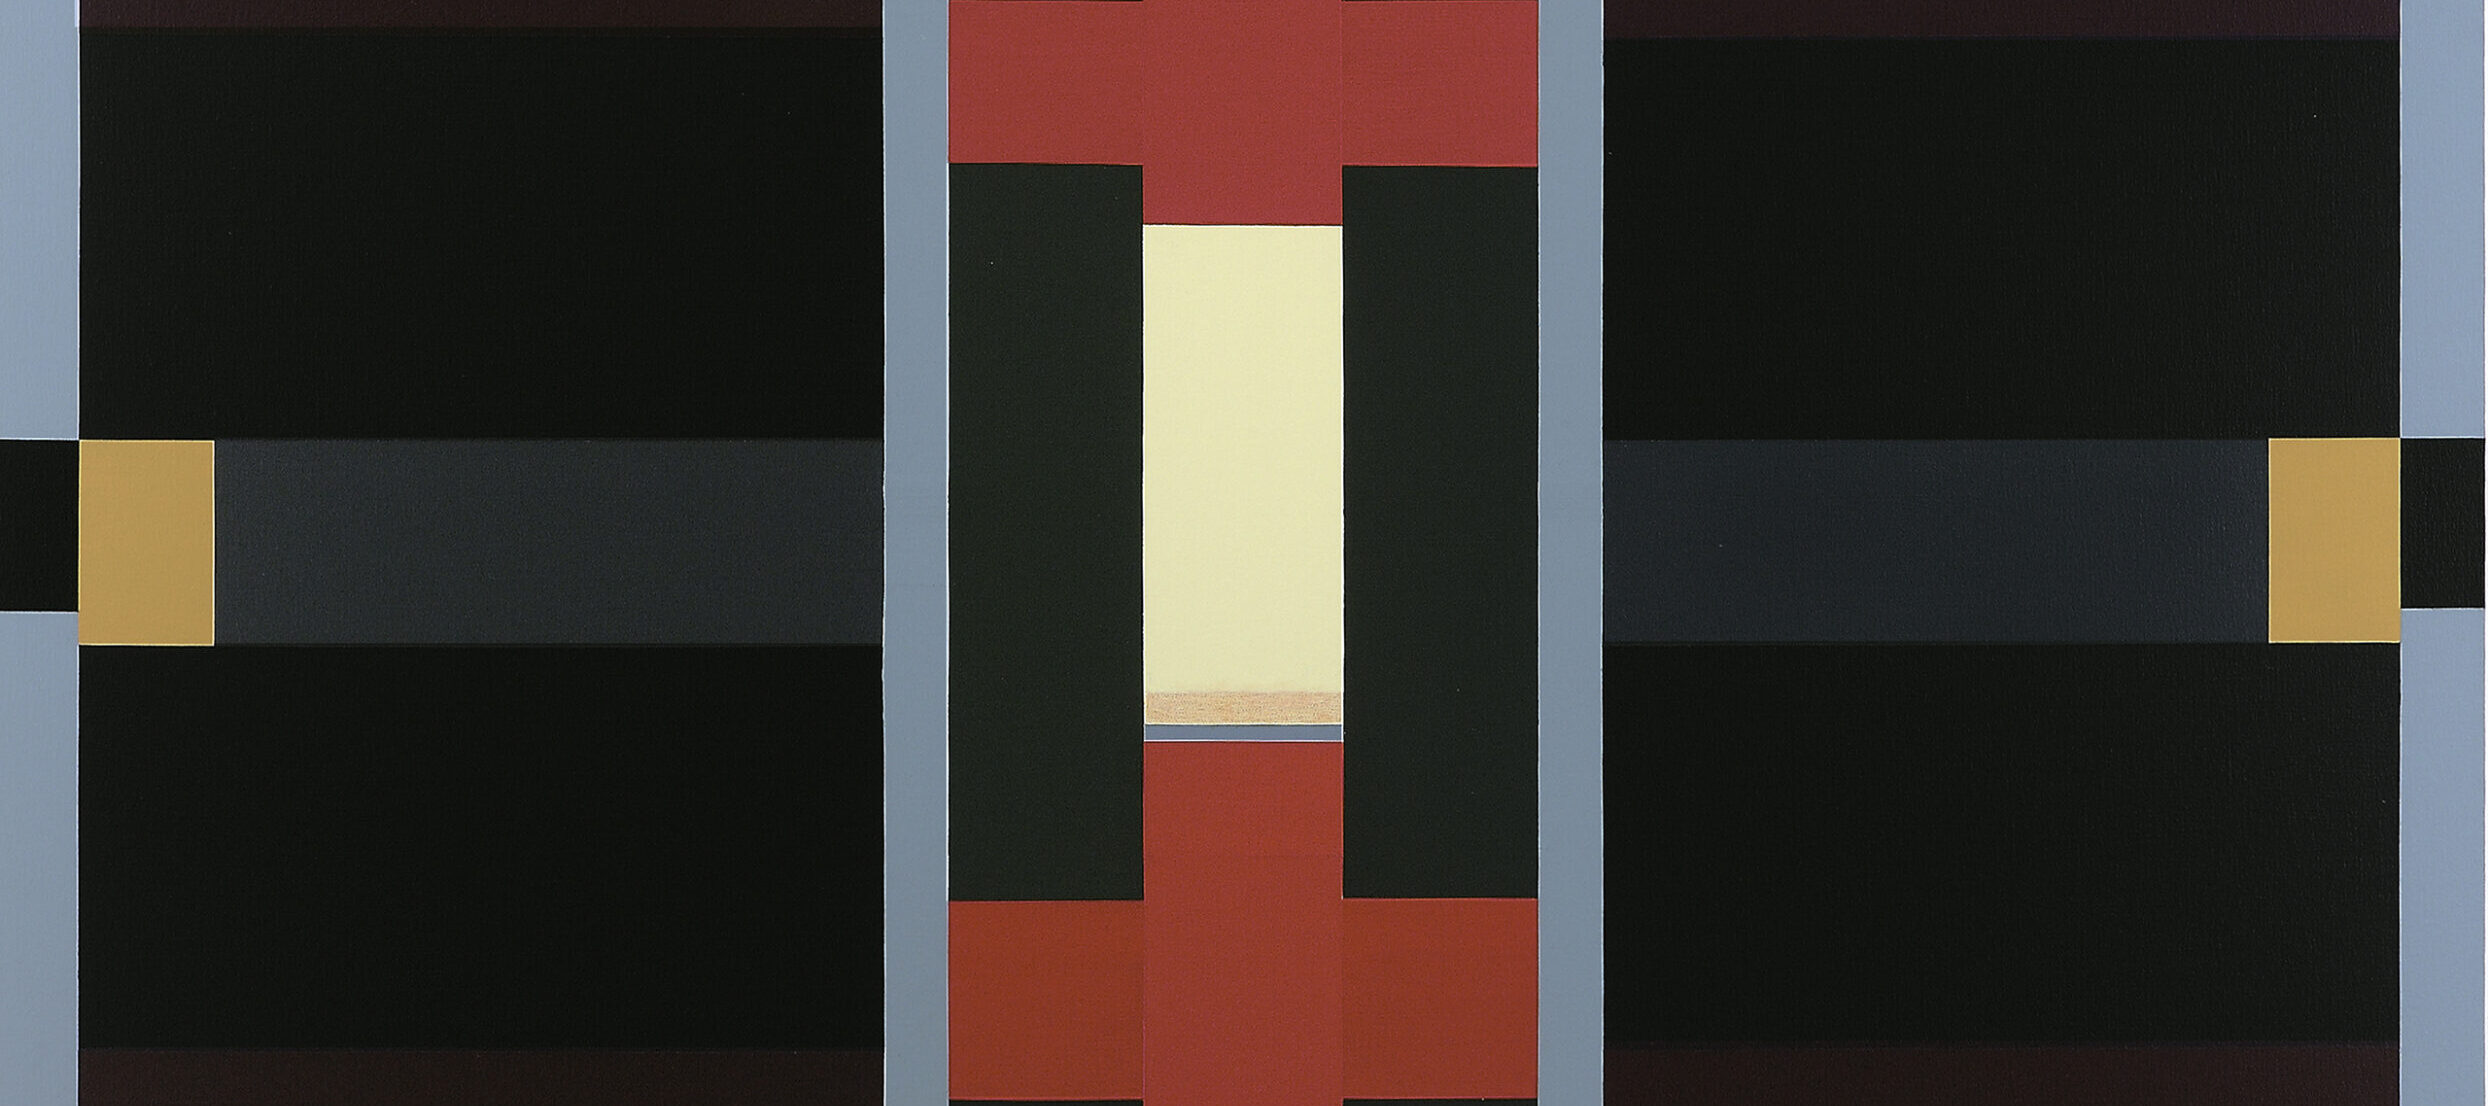 Abstract painting of varying sizes of rectangles divided into three vertical sections flanked by thin, light blue stripes. The central composition includes red cross-shapes with cream, grey and black rectangles; on either side are symmetrical black, brown, and gray horizontal stripes.